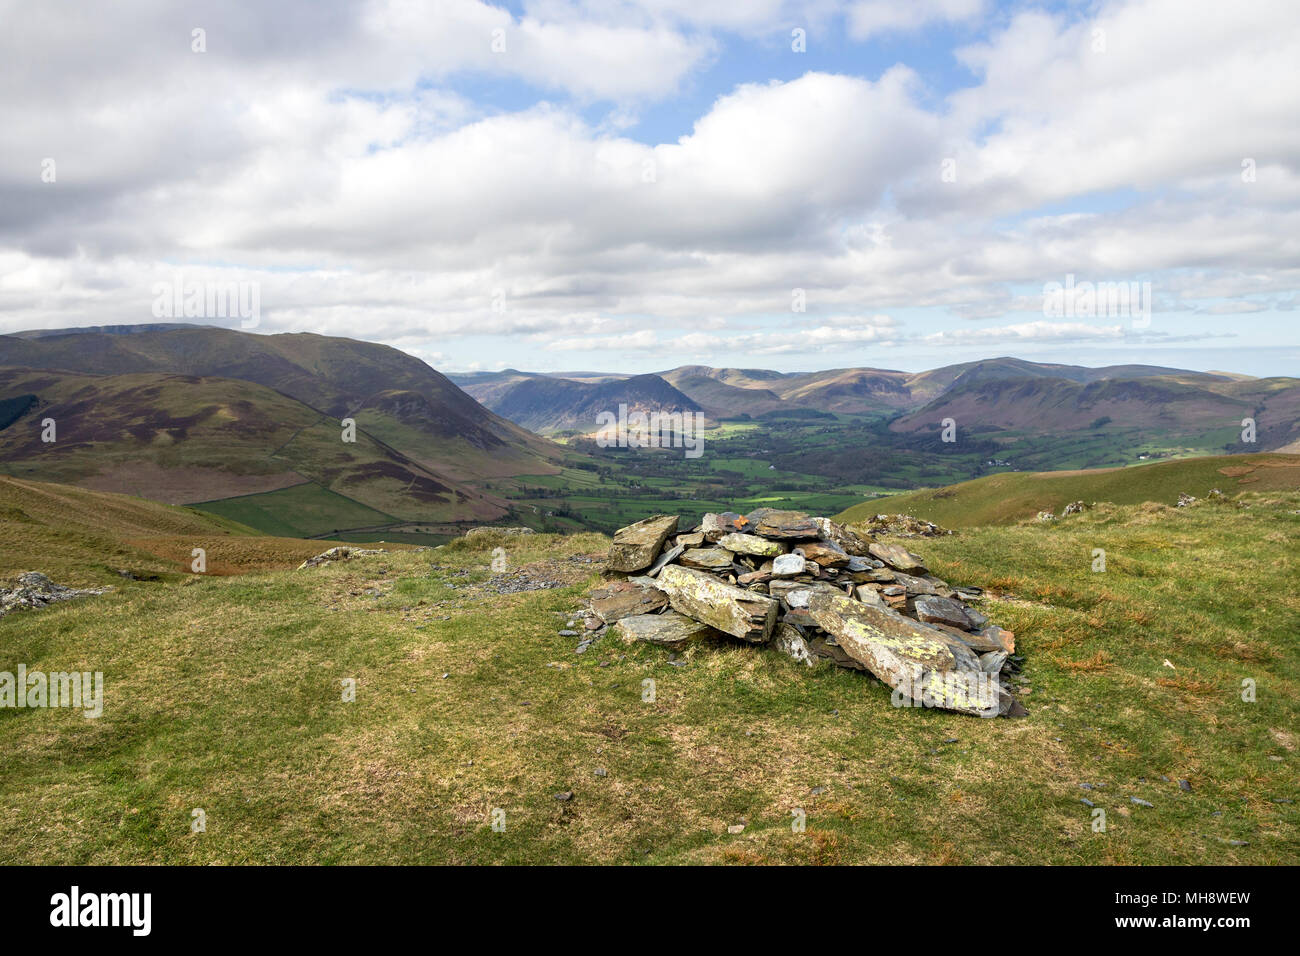 The View South West Over Lorton Vale From the Top of Graystones, Lake District, Cumbria, UK. Stock Photo